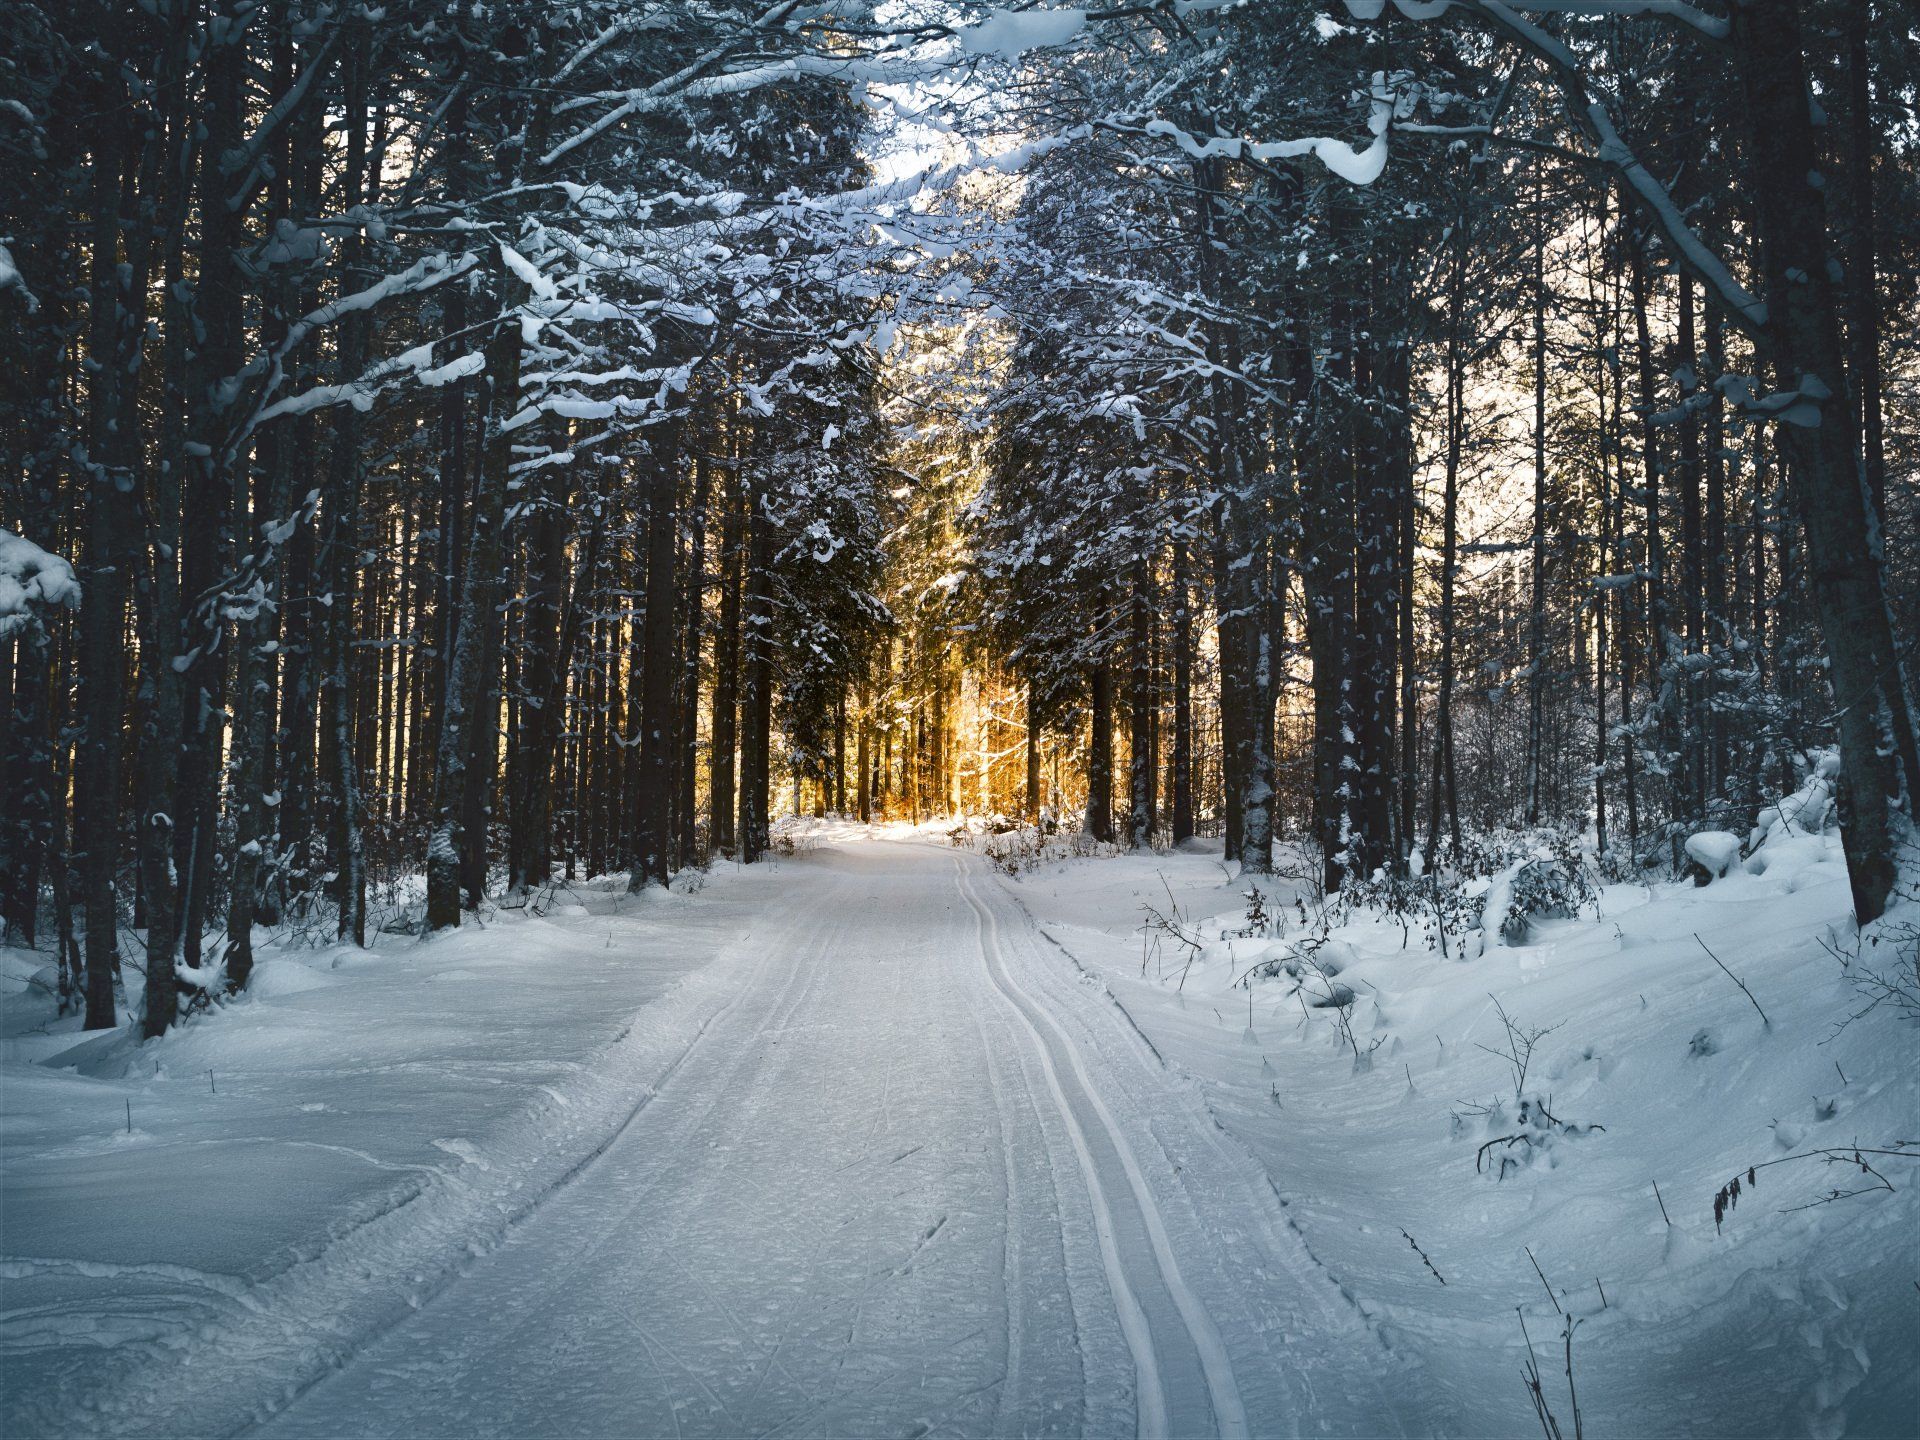 a snowy road in the middle of a forest